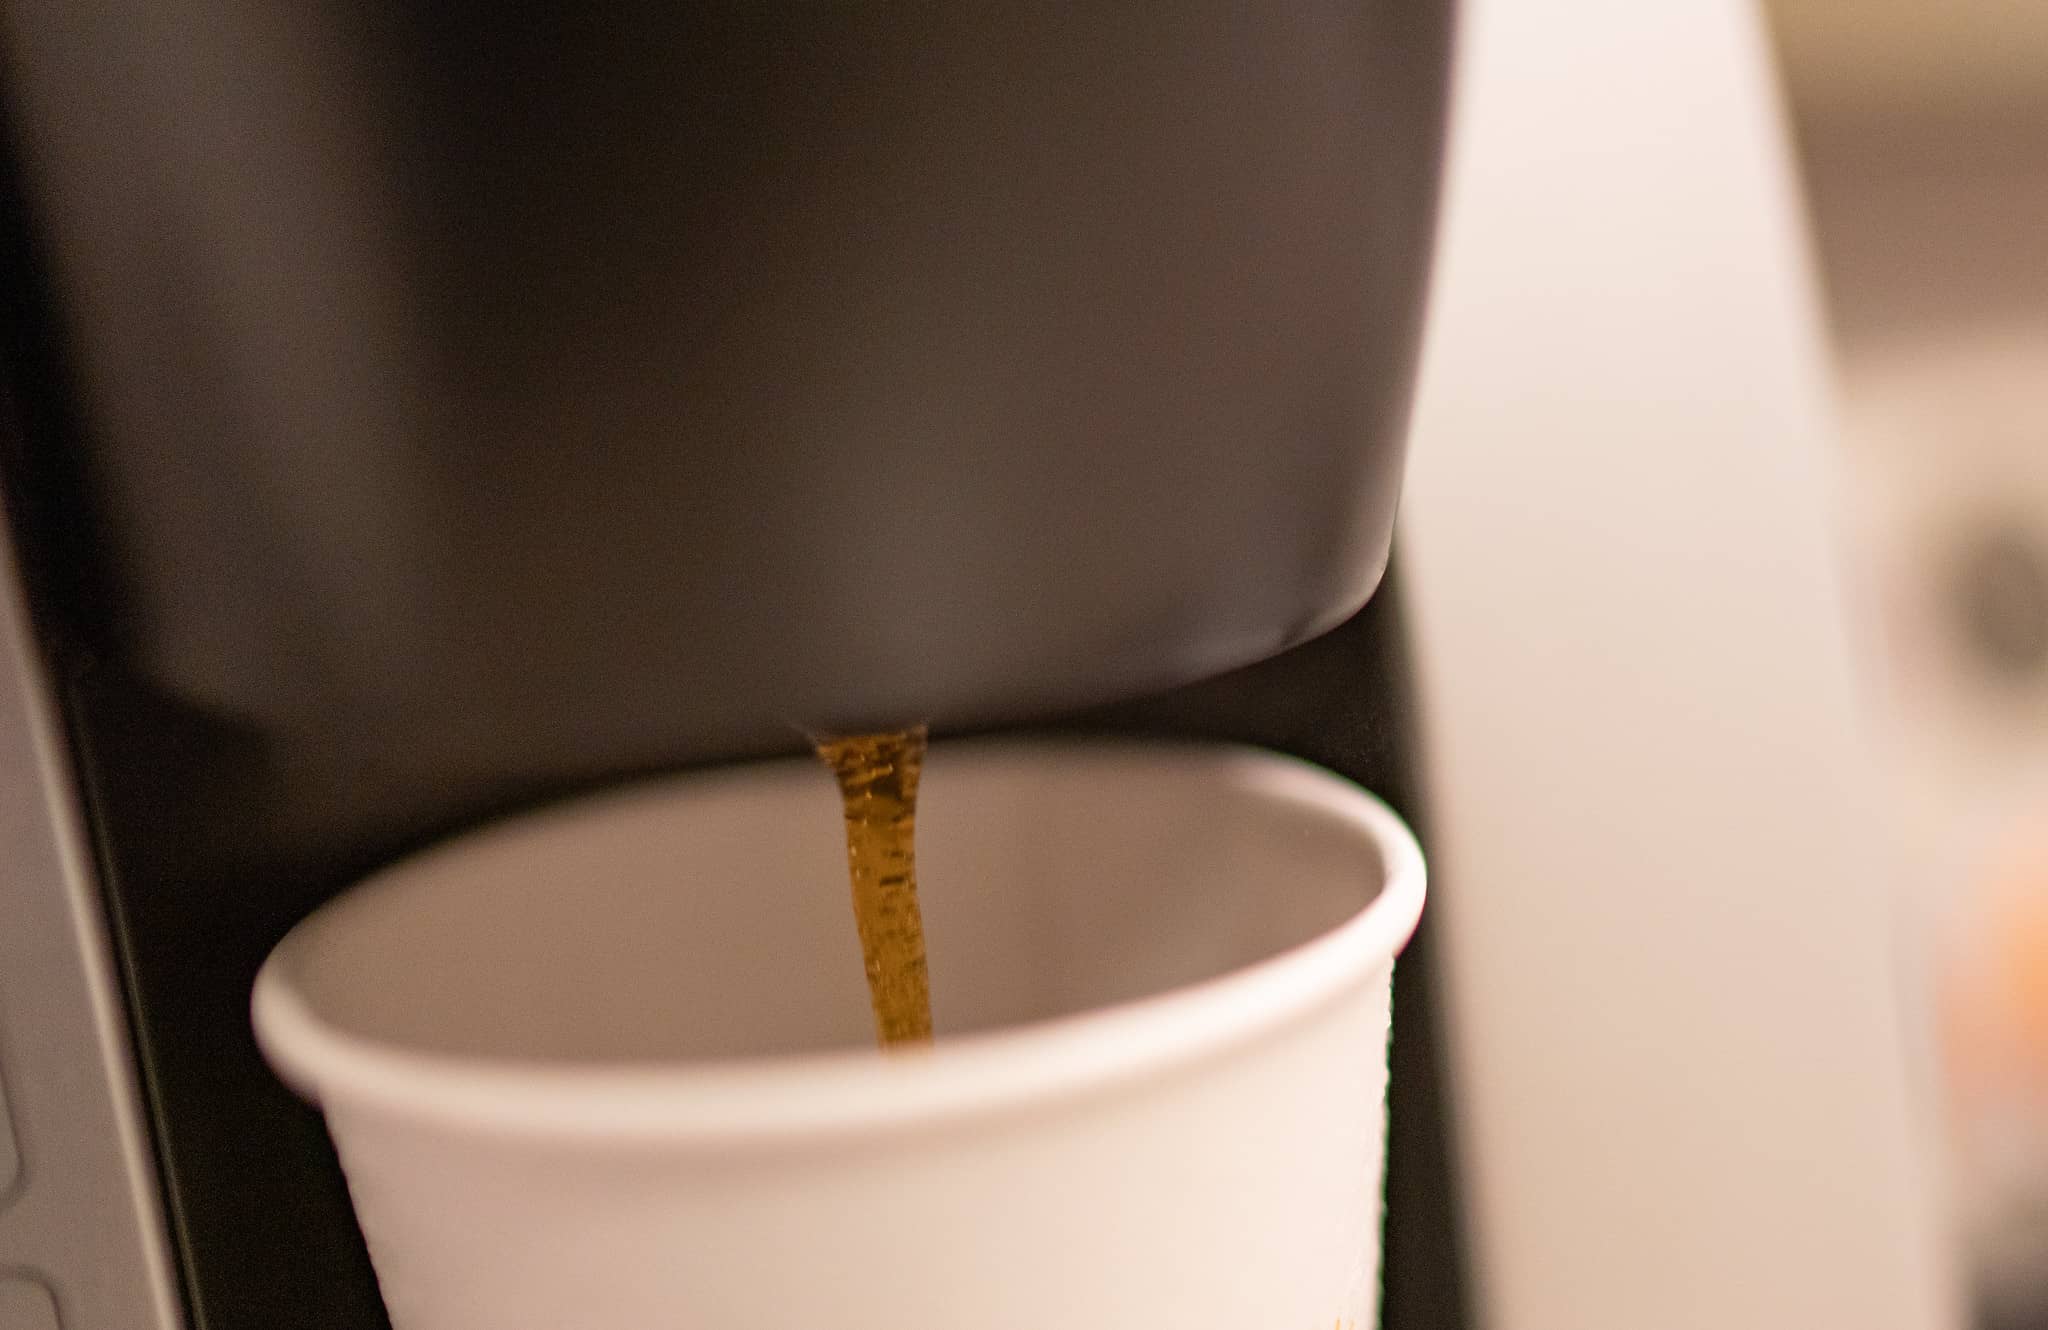 keurig pouring coffee into a paper cup